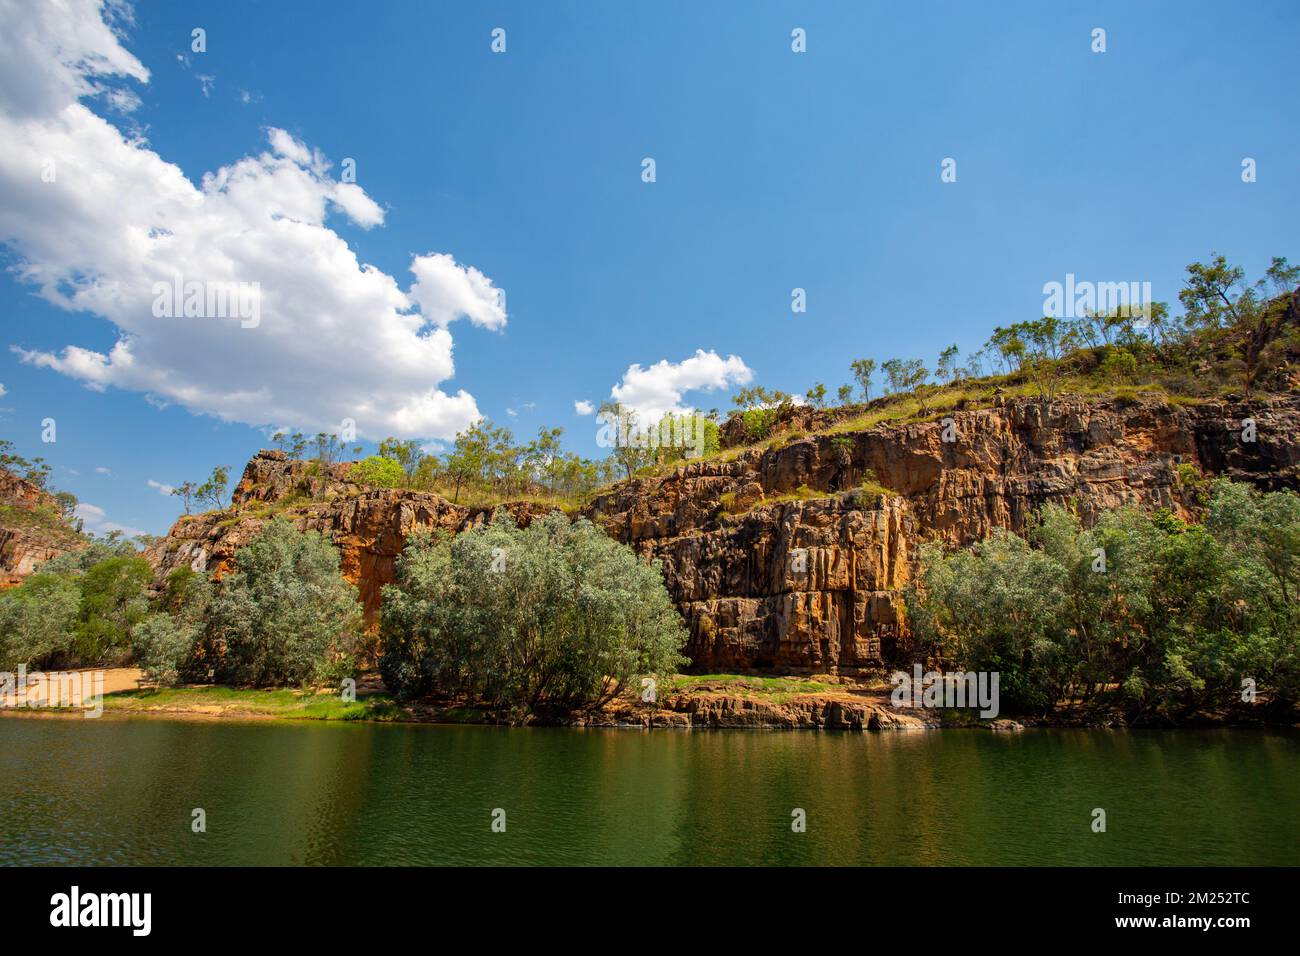 View of the Katherine River and its deep gorge carved through ancient sandstone, in Nitmiluk (Katherine Gorge) National Park, Northern Territory, Aust Stock Photo